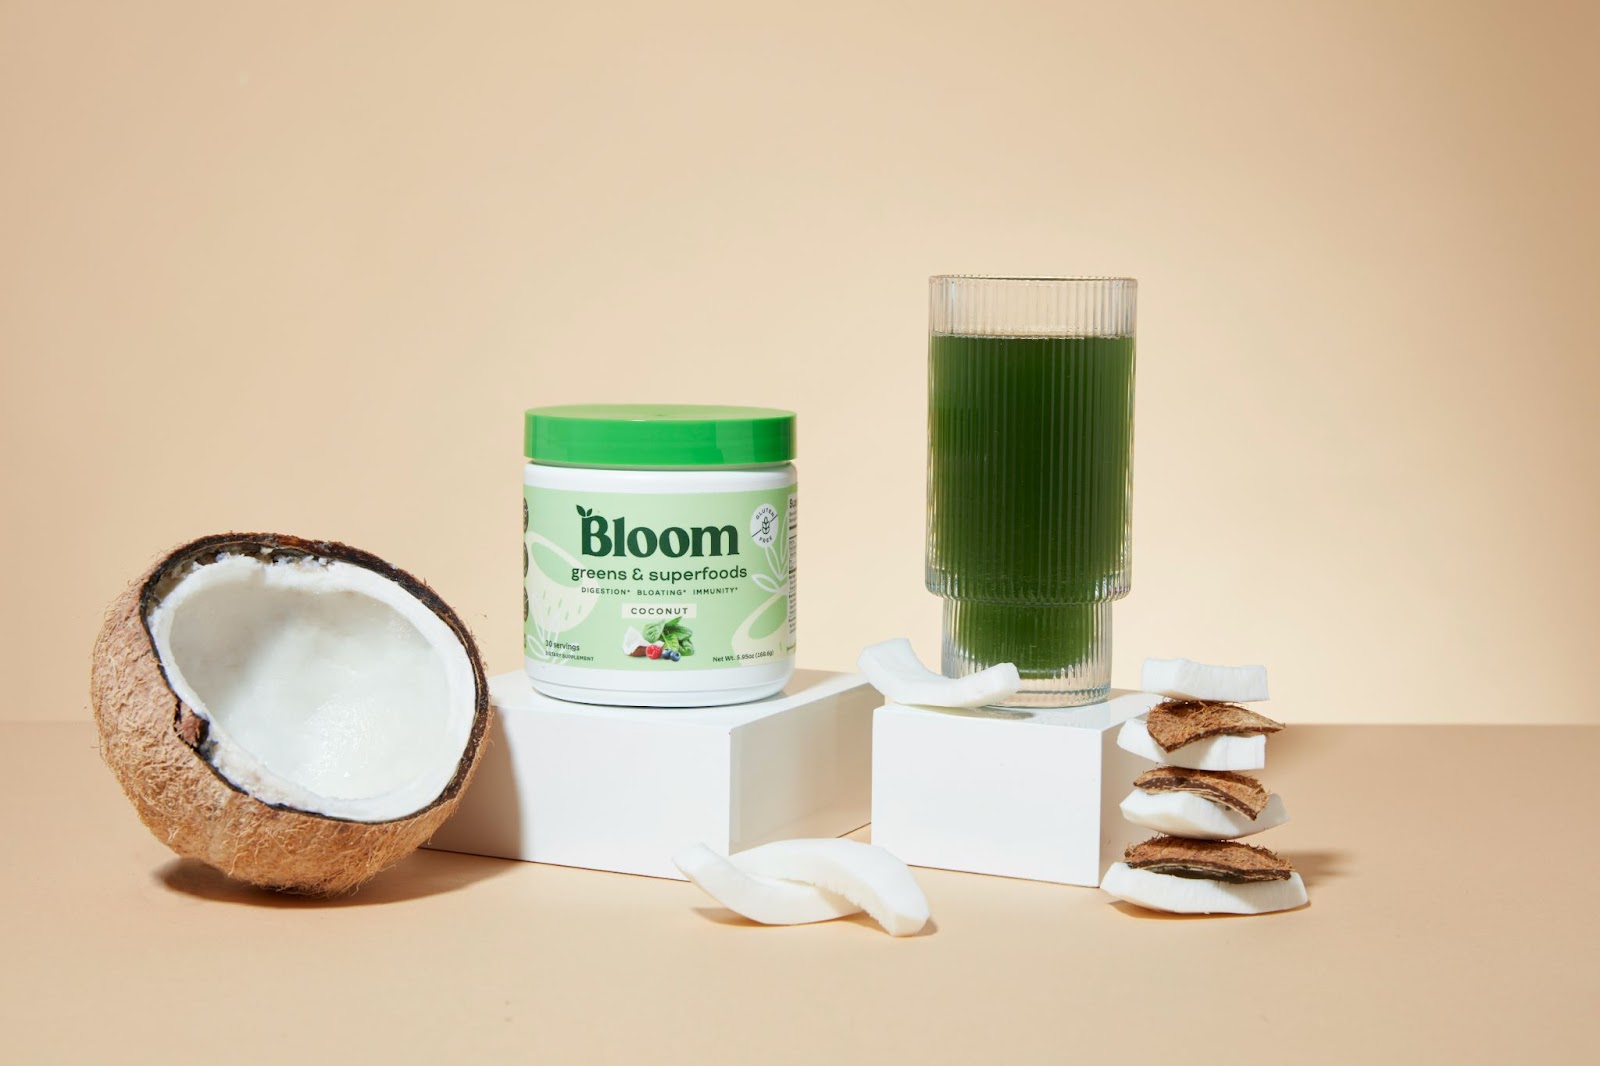 bloom nutrition products in jars with a coconut broken open next to it